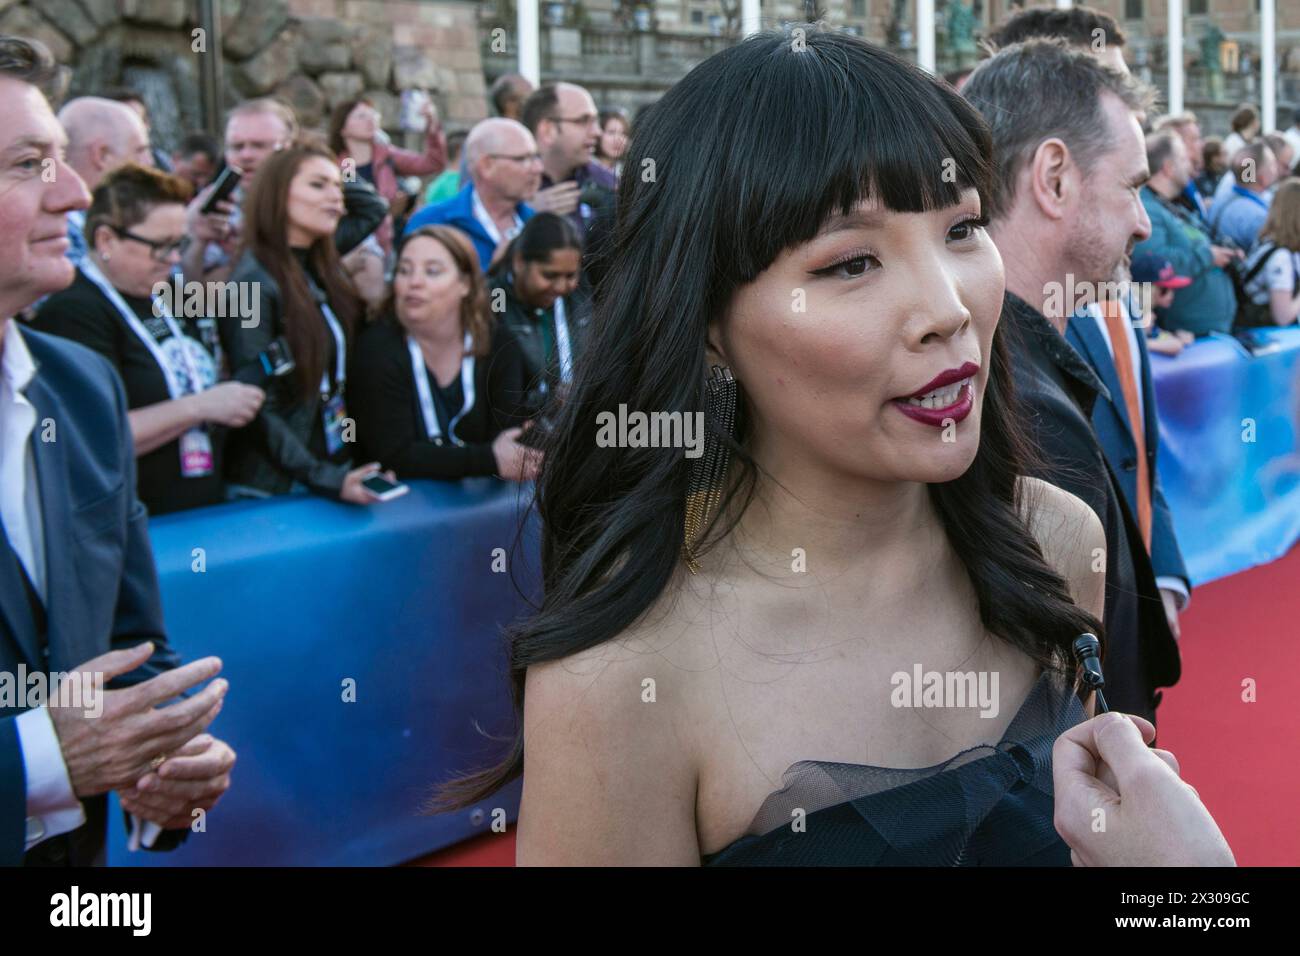 Eurovision Song Contest 2016, Stockholm, Sweden Stockholm, Sweden. 8 May. Dami Im from Australia on the red carpet for the ESC 2016. Stockholm Euroclub Sweden *** Eurovision Song Contest 2016, Stockholm, Sweden Stockholm, Sweden 8 May Dami Im from Australia on the red carpet for the ESC 2016 Stockholm Euroclub Sweden Stock Photo